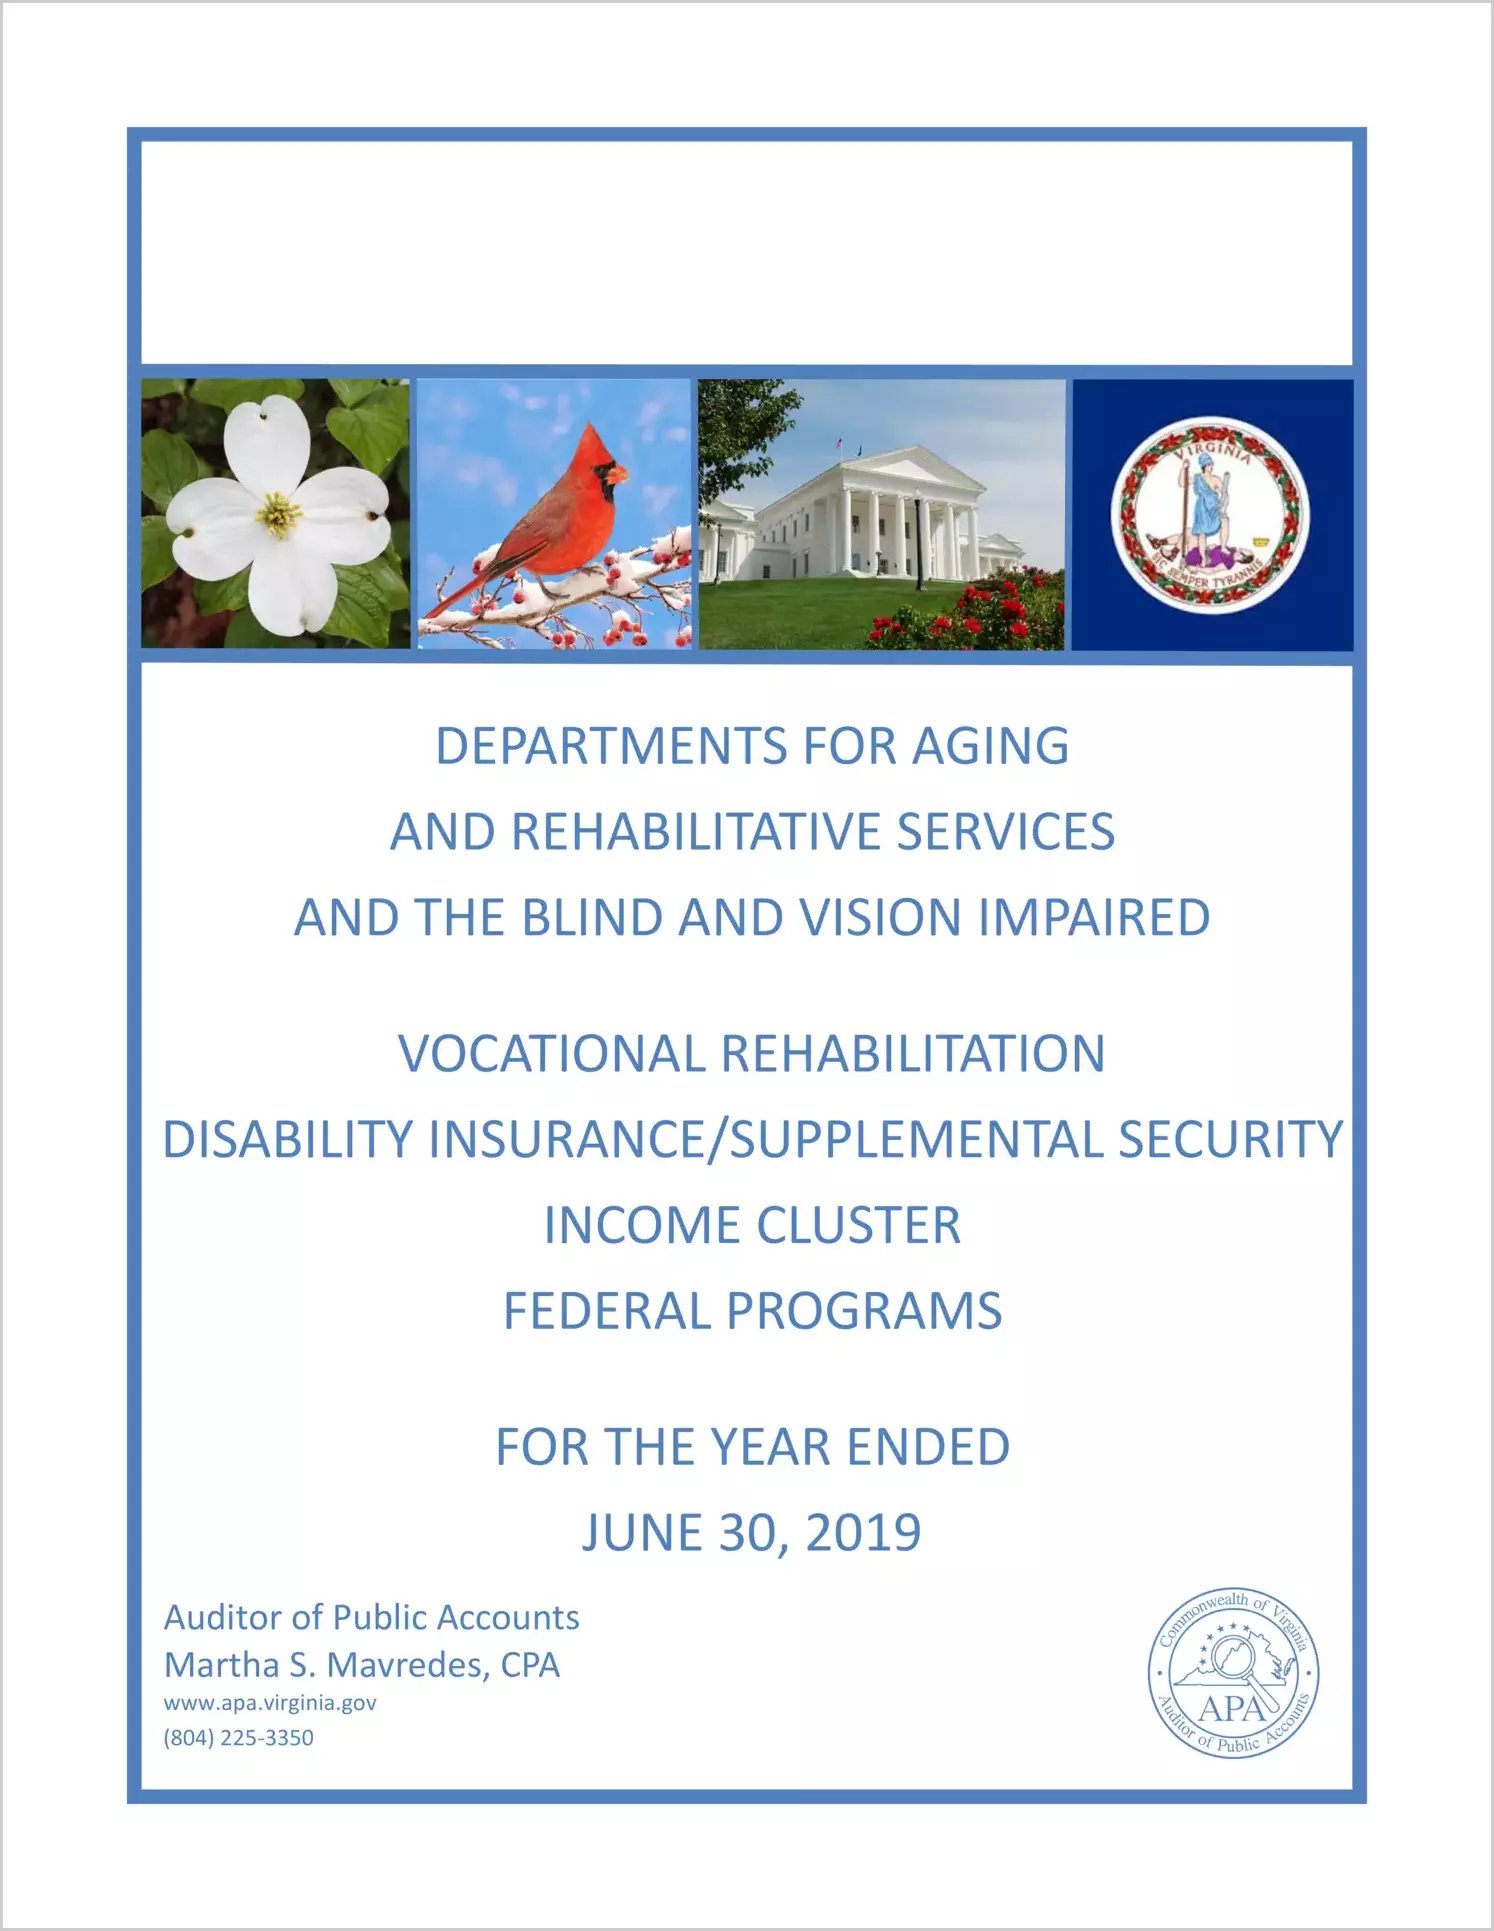 Department for Aging and Rehabilitative Services and the Blind and Vision and Impaired, Vocational Rehabilitation Disability Insurance/Supplemental Security Income Cluster Federal Programs for the year ended June 30, 2019